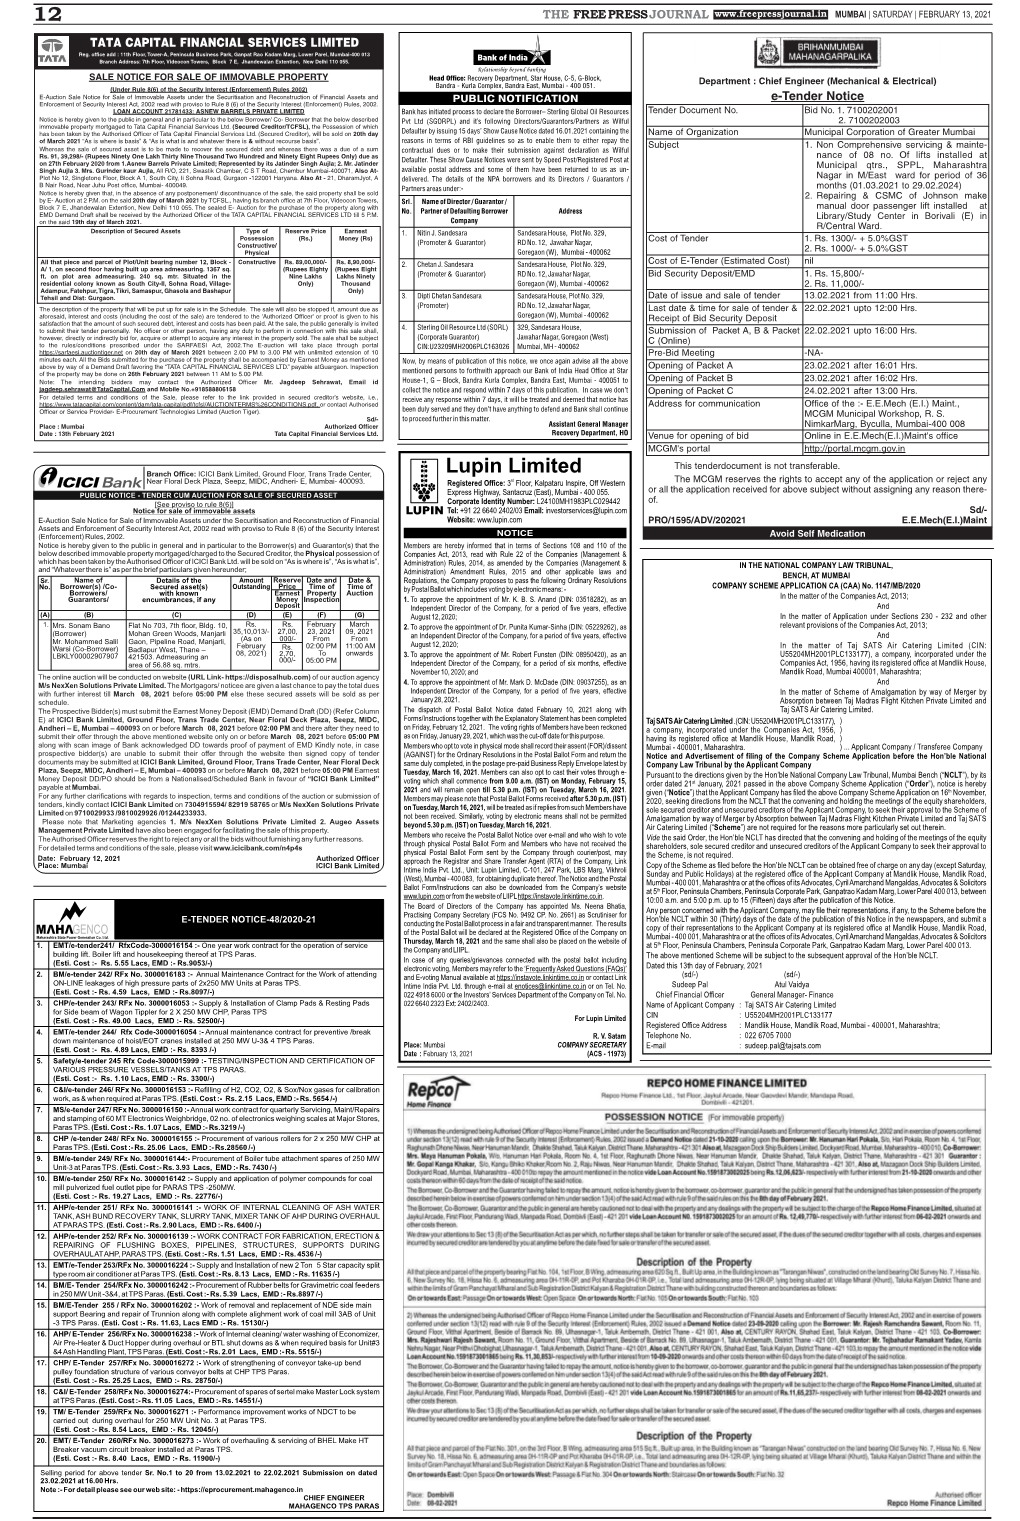 TATA CAPITAL FINANCIAL SERVICES LIMITED E-Tender Notice the FREEPRESSJOURNAL